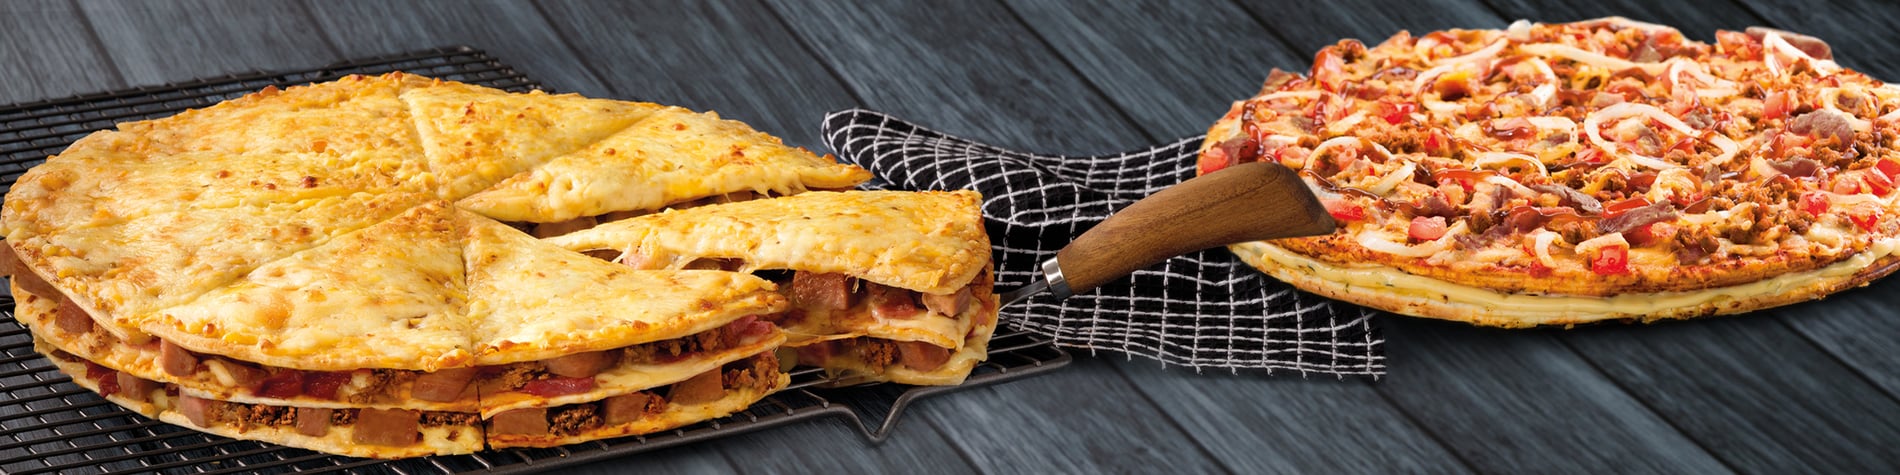 Speciality pizzas from Debonairs Pizza, including the Triple-Decker® – 3 layers of pizza stacked with meat between the layers with a cheese topping